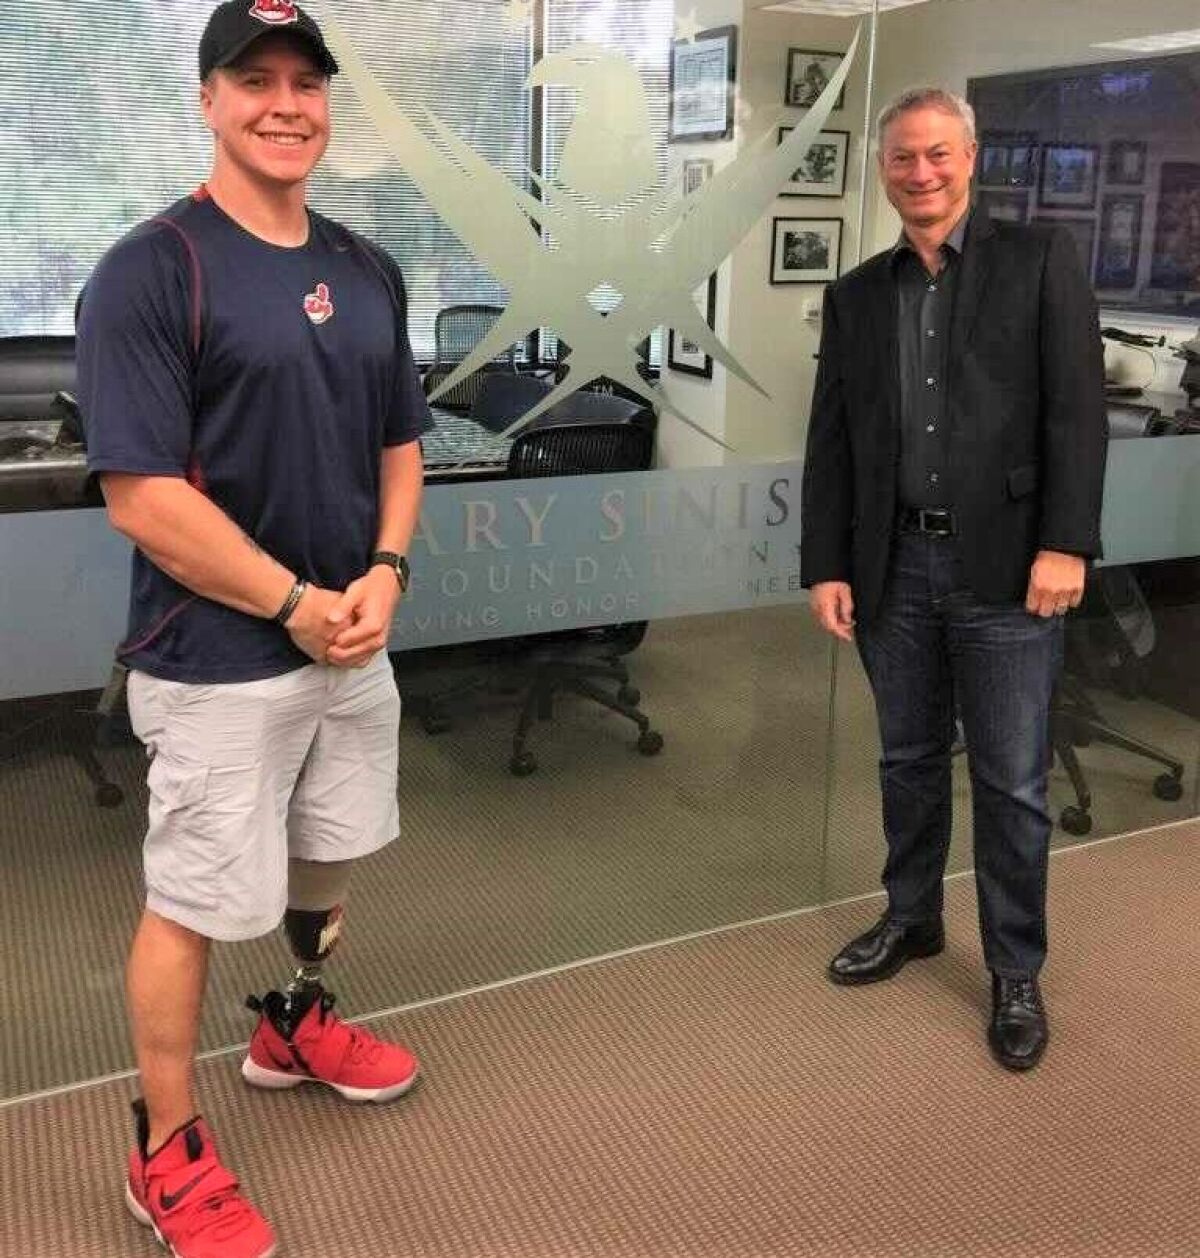 Daniel "Doc" Jacobs, retired Navy combat vet, is with Gary Sinise, whose foundation has built Jacobs an adapted smart house.